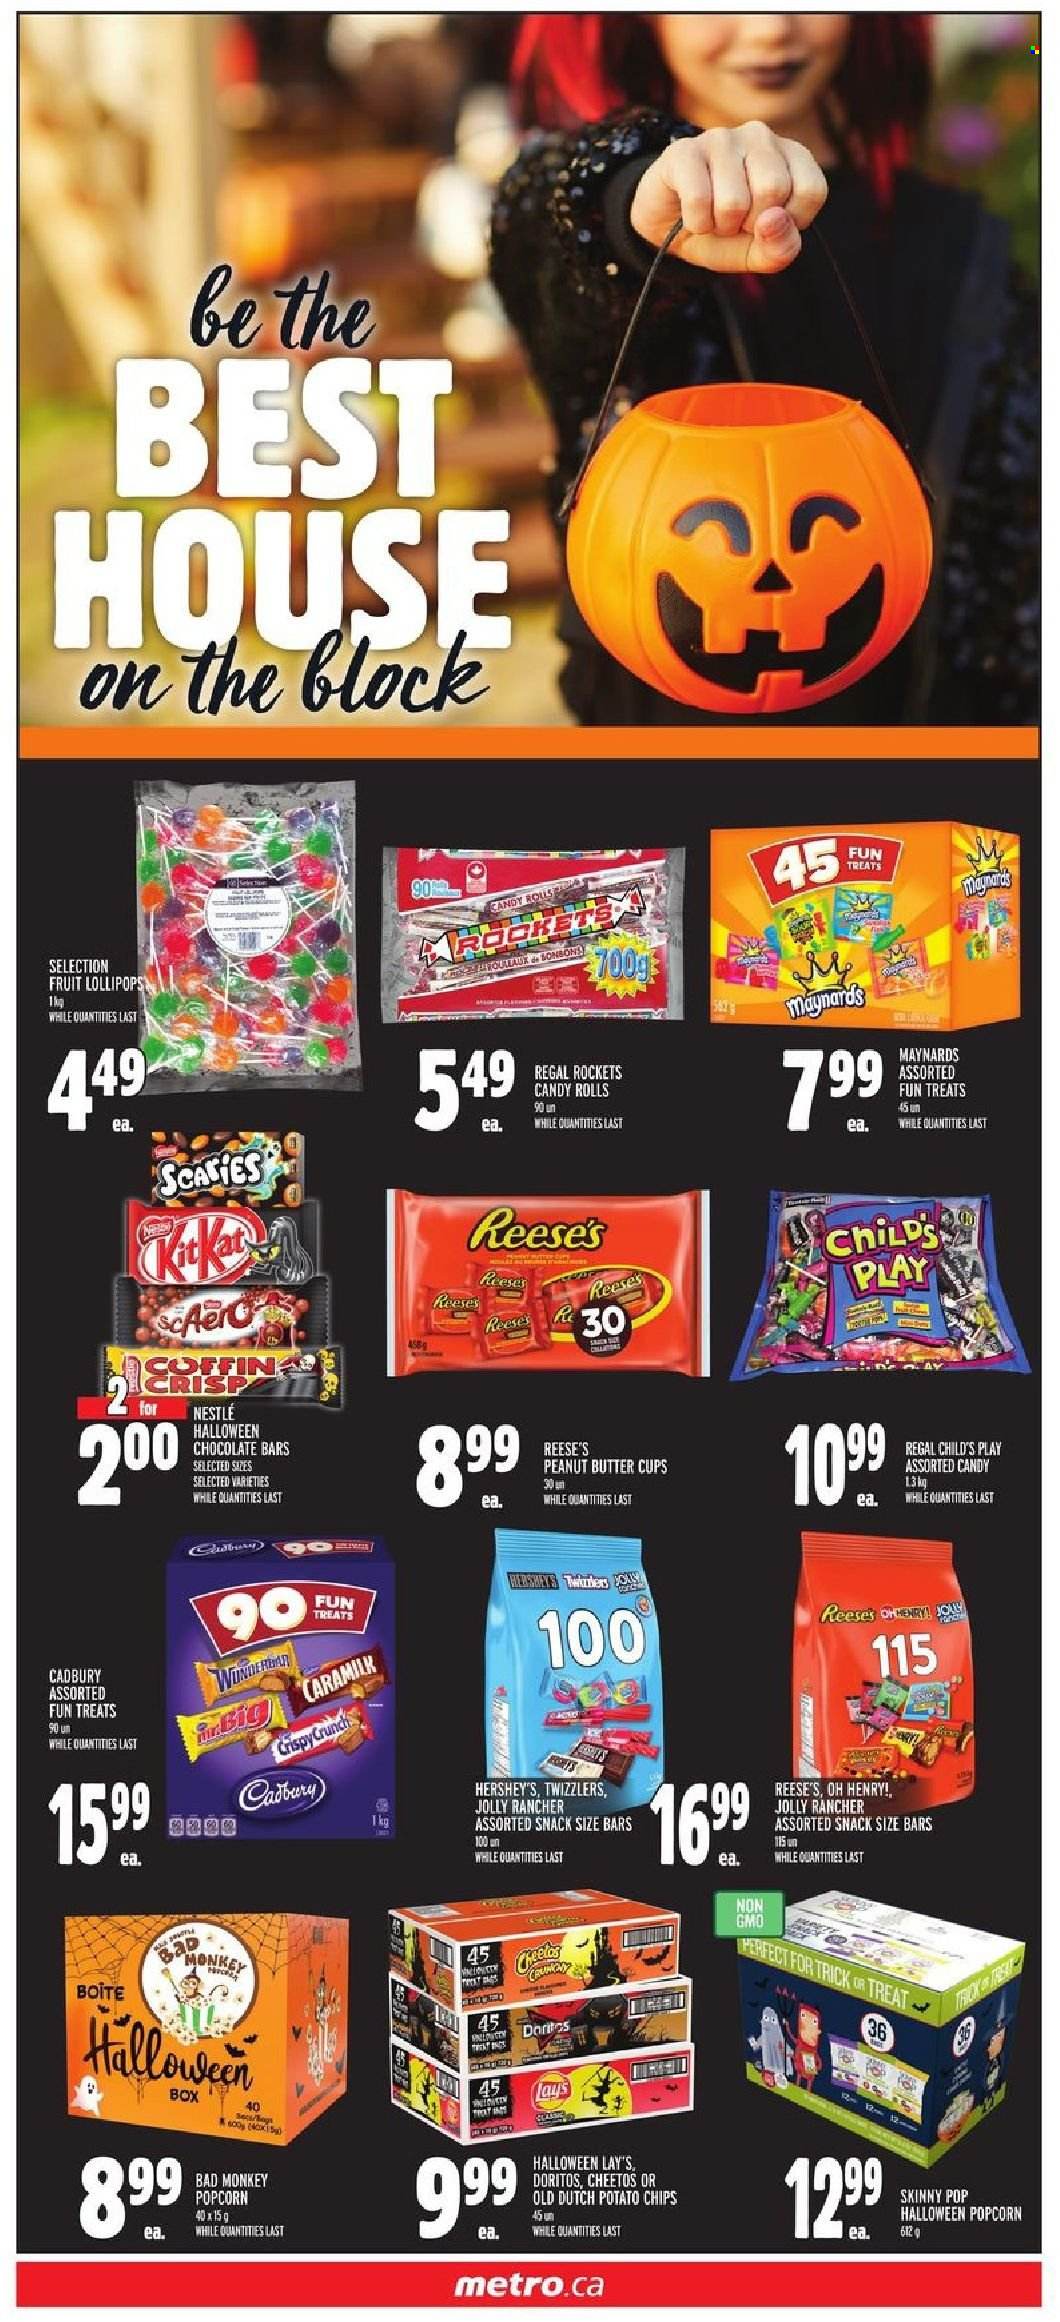 thumbnail - Metro Flyer - October 21, 2021 - October 27, 2021 - Sales products - Reese's, Hershey's, snack, lollipop, Cadbury, peanut butter cups, chocolate bar, Doritos, potato chips, Cheetos, Lay’s, popcorn, Skinny Pop, Nestlé, chips. Page 8.